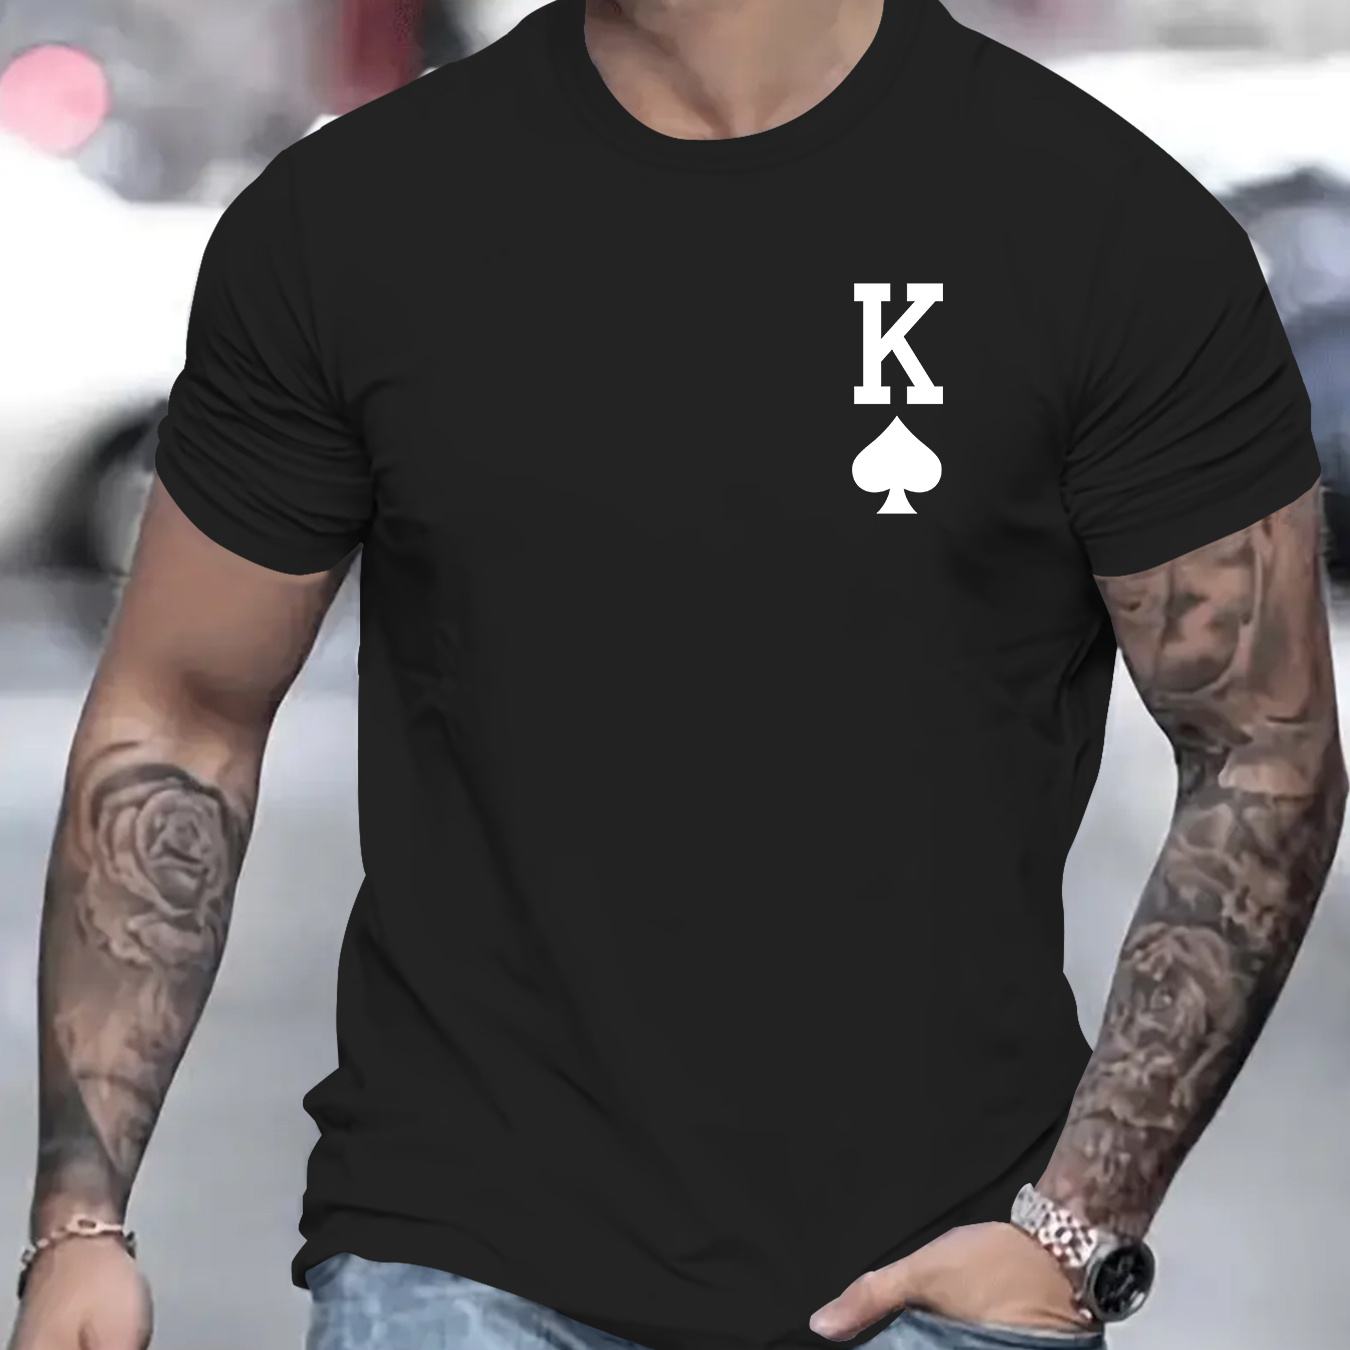 

Men's Casual Novelty T-shirt, K Of Spades Creative Print Short Sleeve Summer Top, Comfort Fit, Stylish Crew Neck Tee For Daily Wear